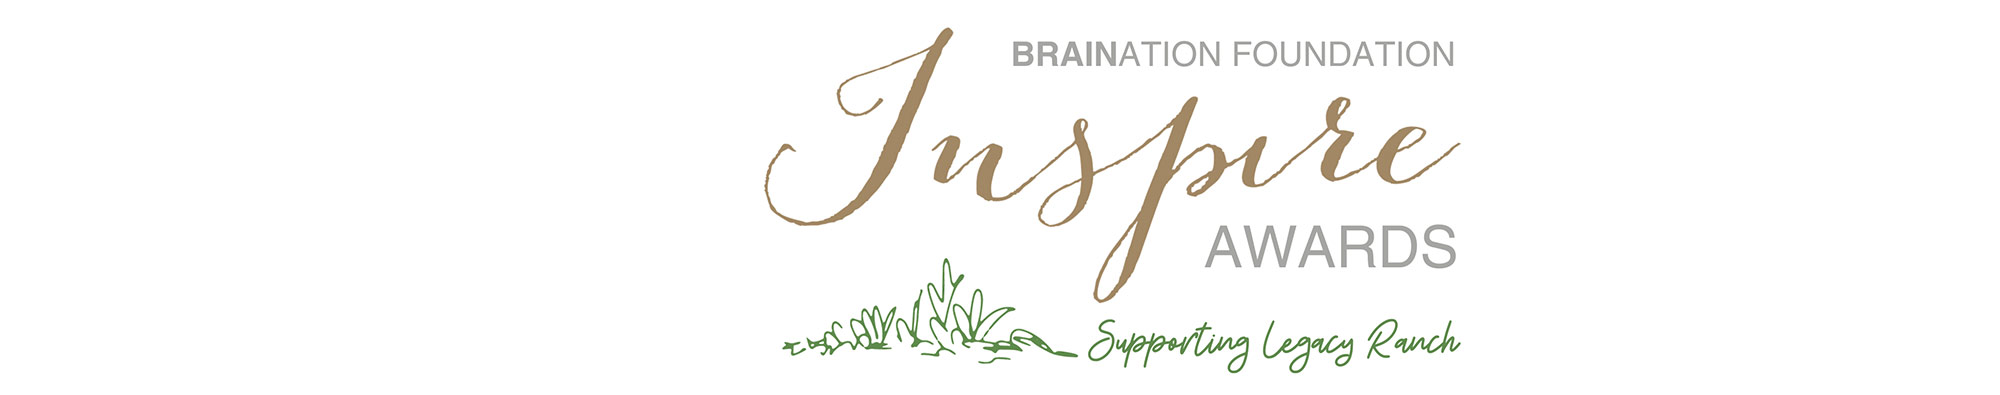 Braination Foundation Inspire Awards. Supporting Rise Inspire Academy.